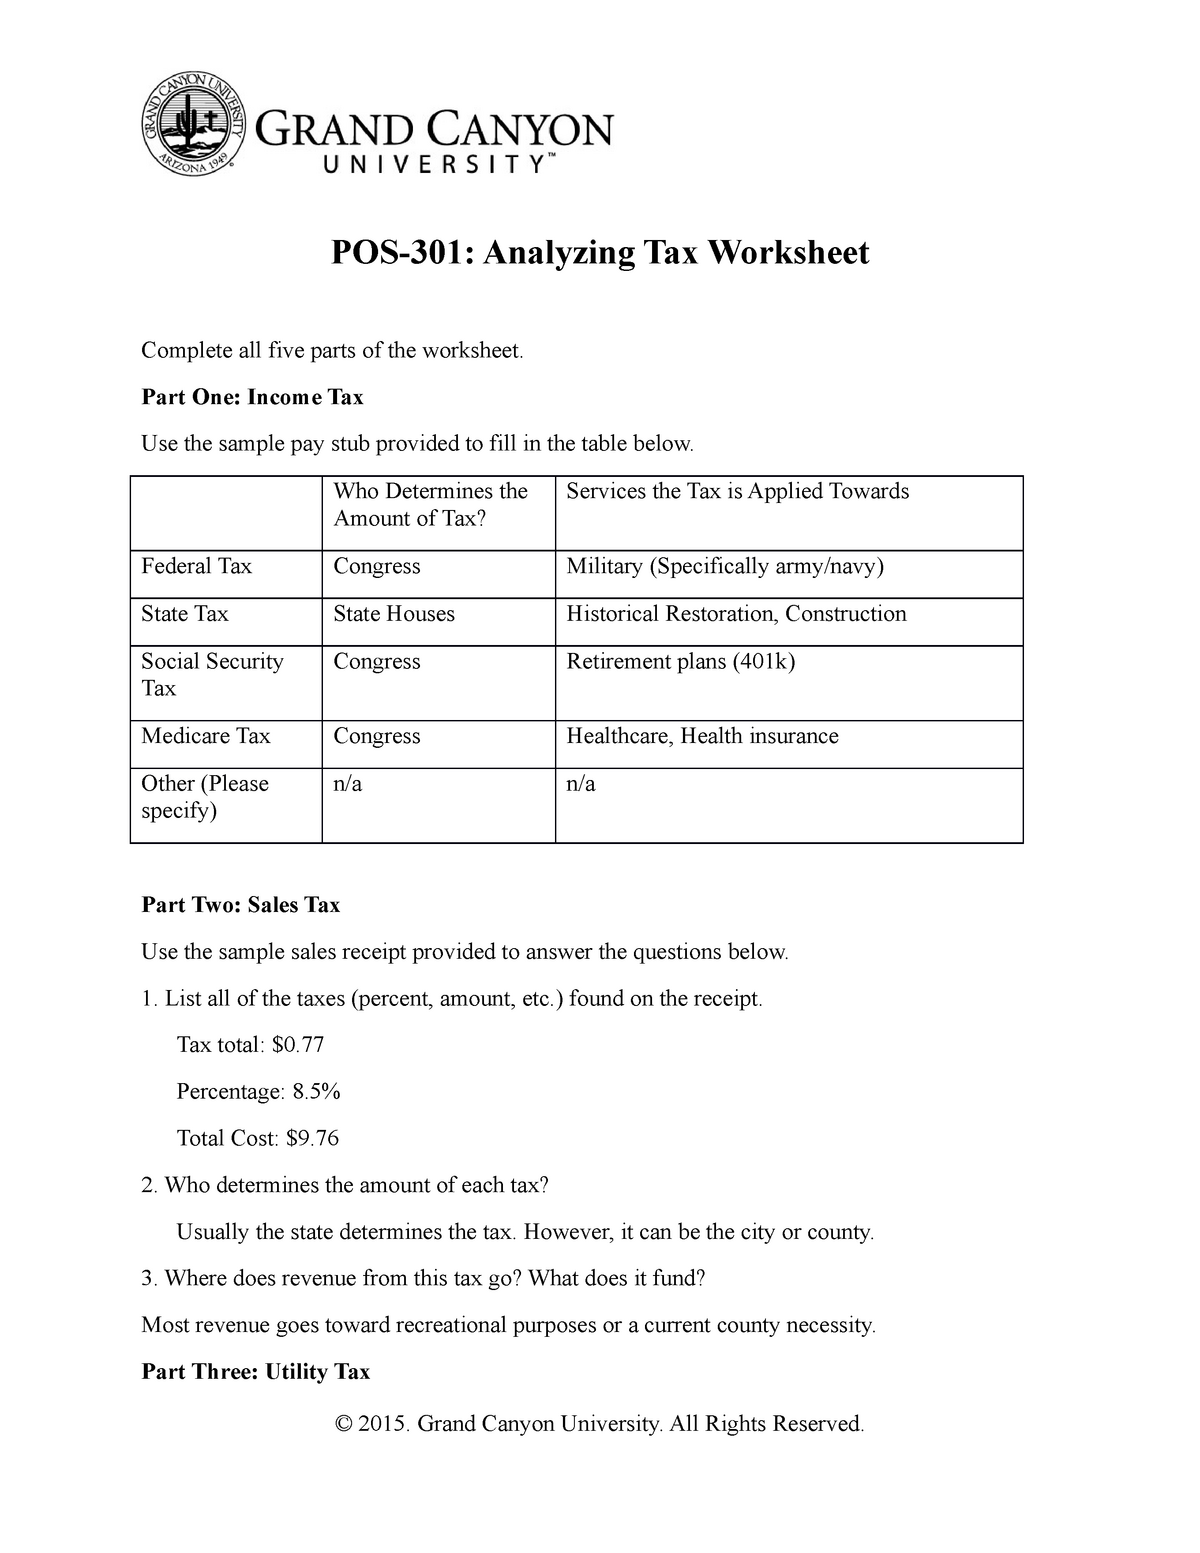 pos-301-analyzing-tax-worksheet-pos-301-analyzing-tax-worksheet-complete-all-five-parts-of